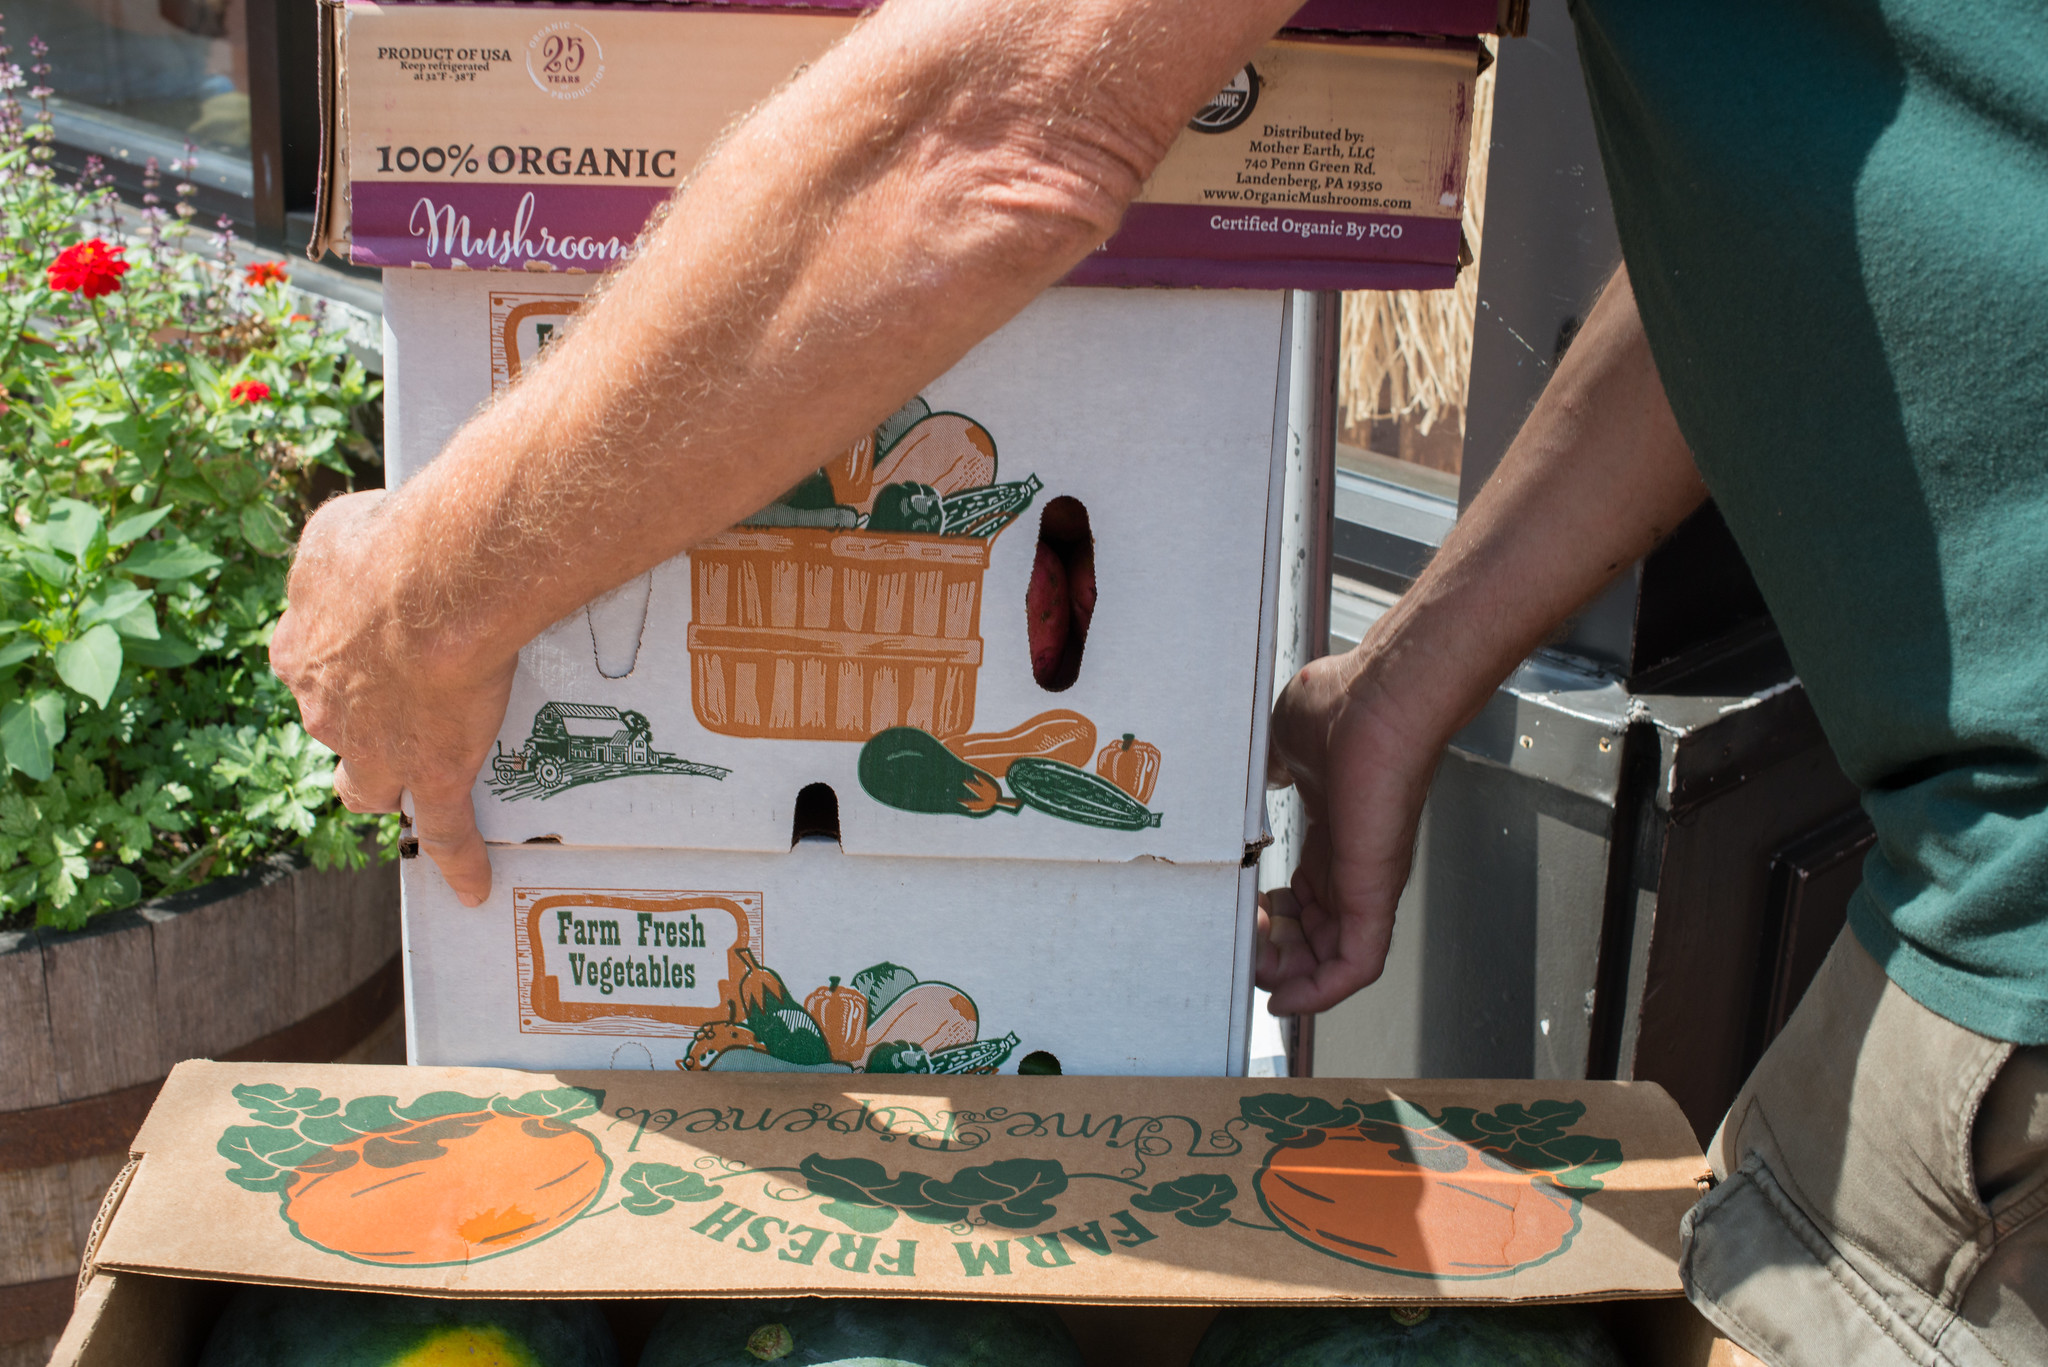 Arms moving a produce box, on a stack of boxes outside.